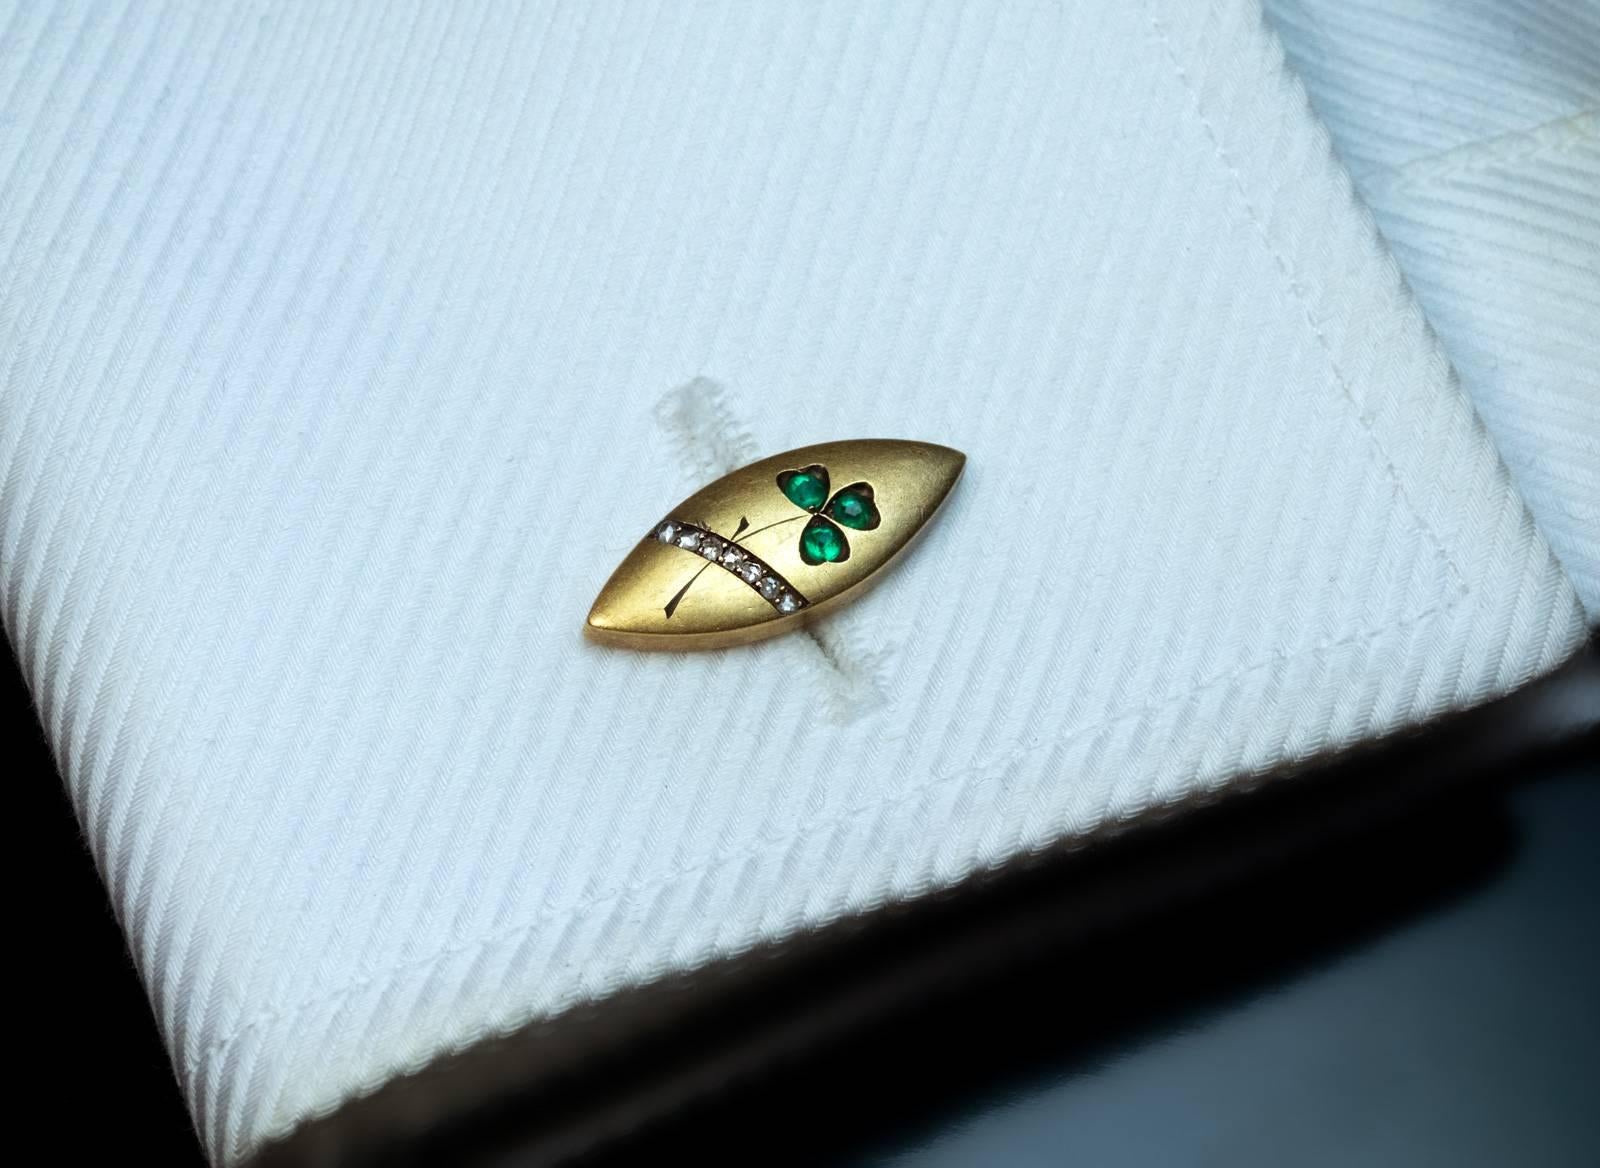 The 14K yellow gold cufflinks are embellished with jeweled Art Nouveau floral design and set with 6 emeralds and 14 old rose cut diamonds.

Marked with later Soviet 583 gold control marks from the 1930s

Width 20 mm (6/8 in.)